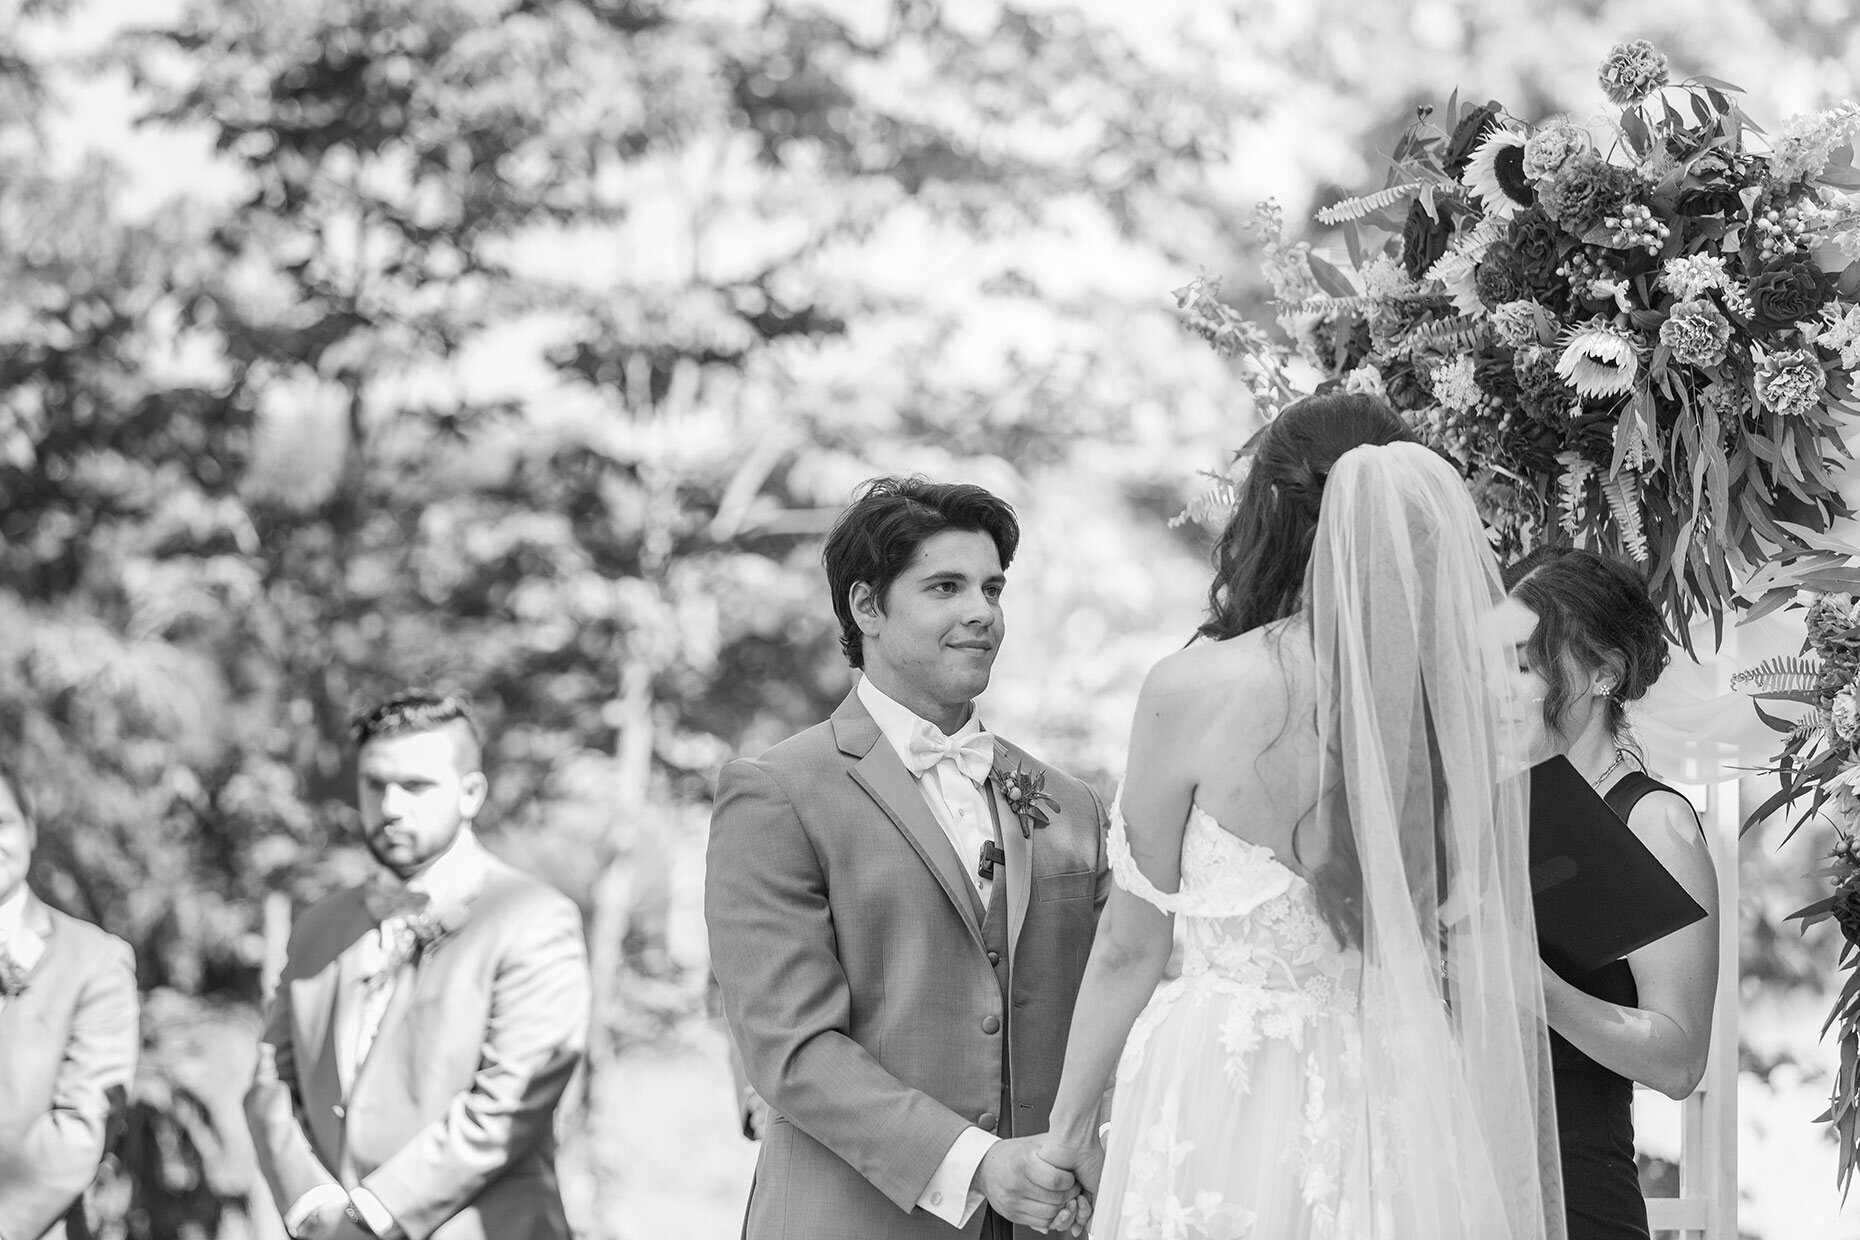 Groom’s reaction in black and white